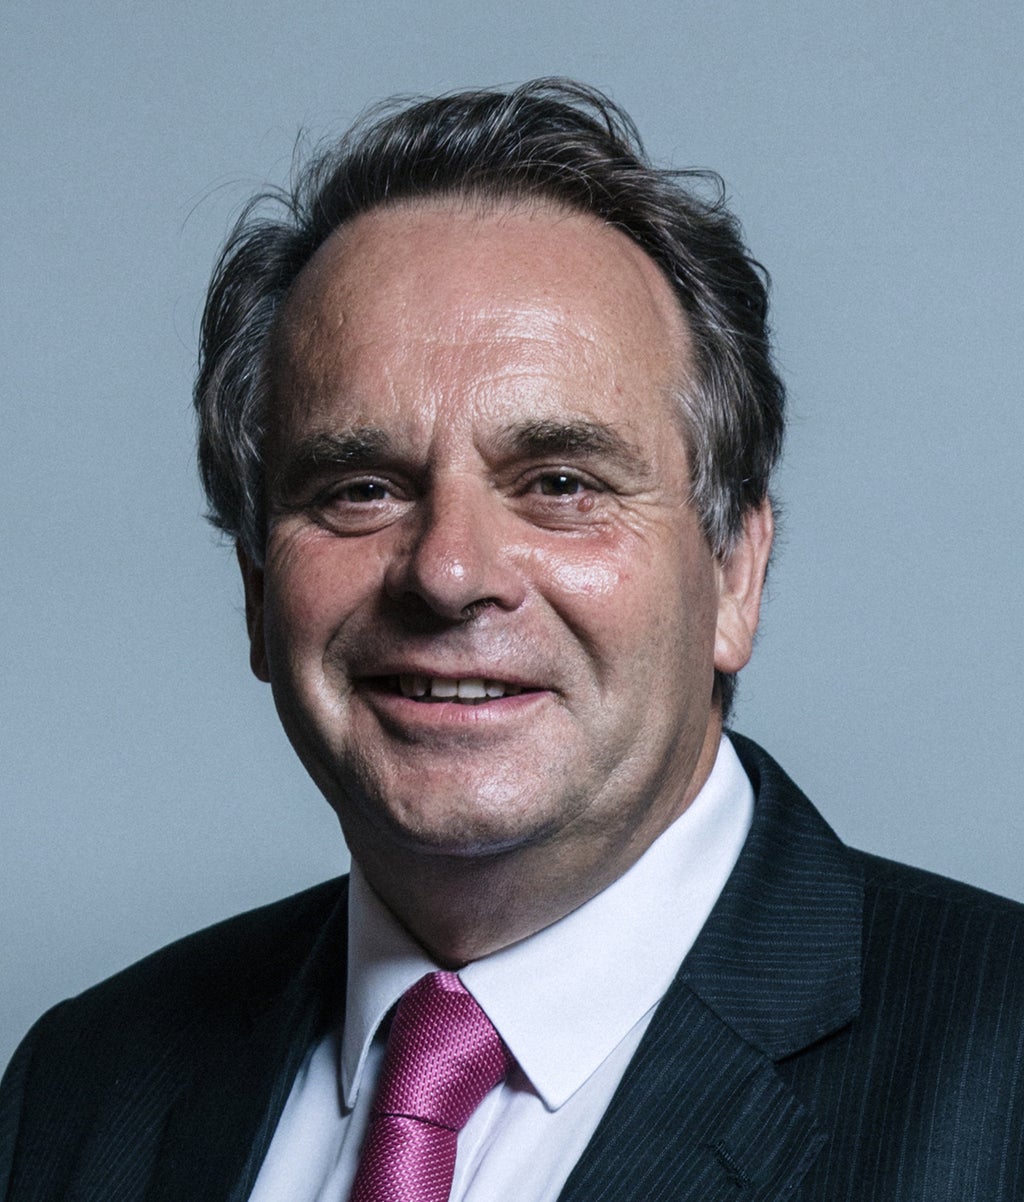 MP Neil Parish has Tory whip suspended over porn watching in Commons claims